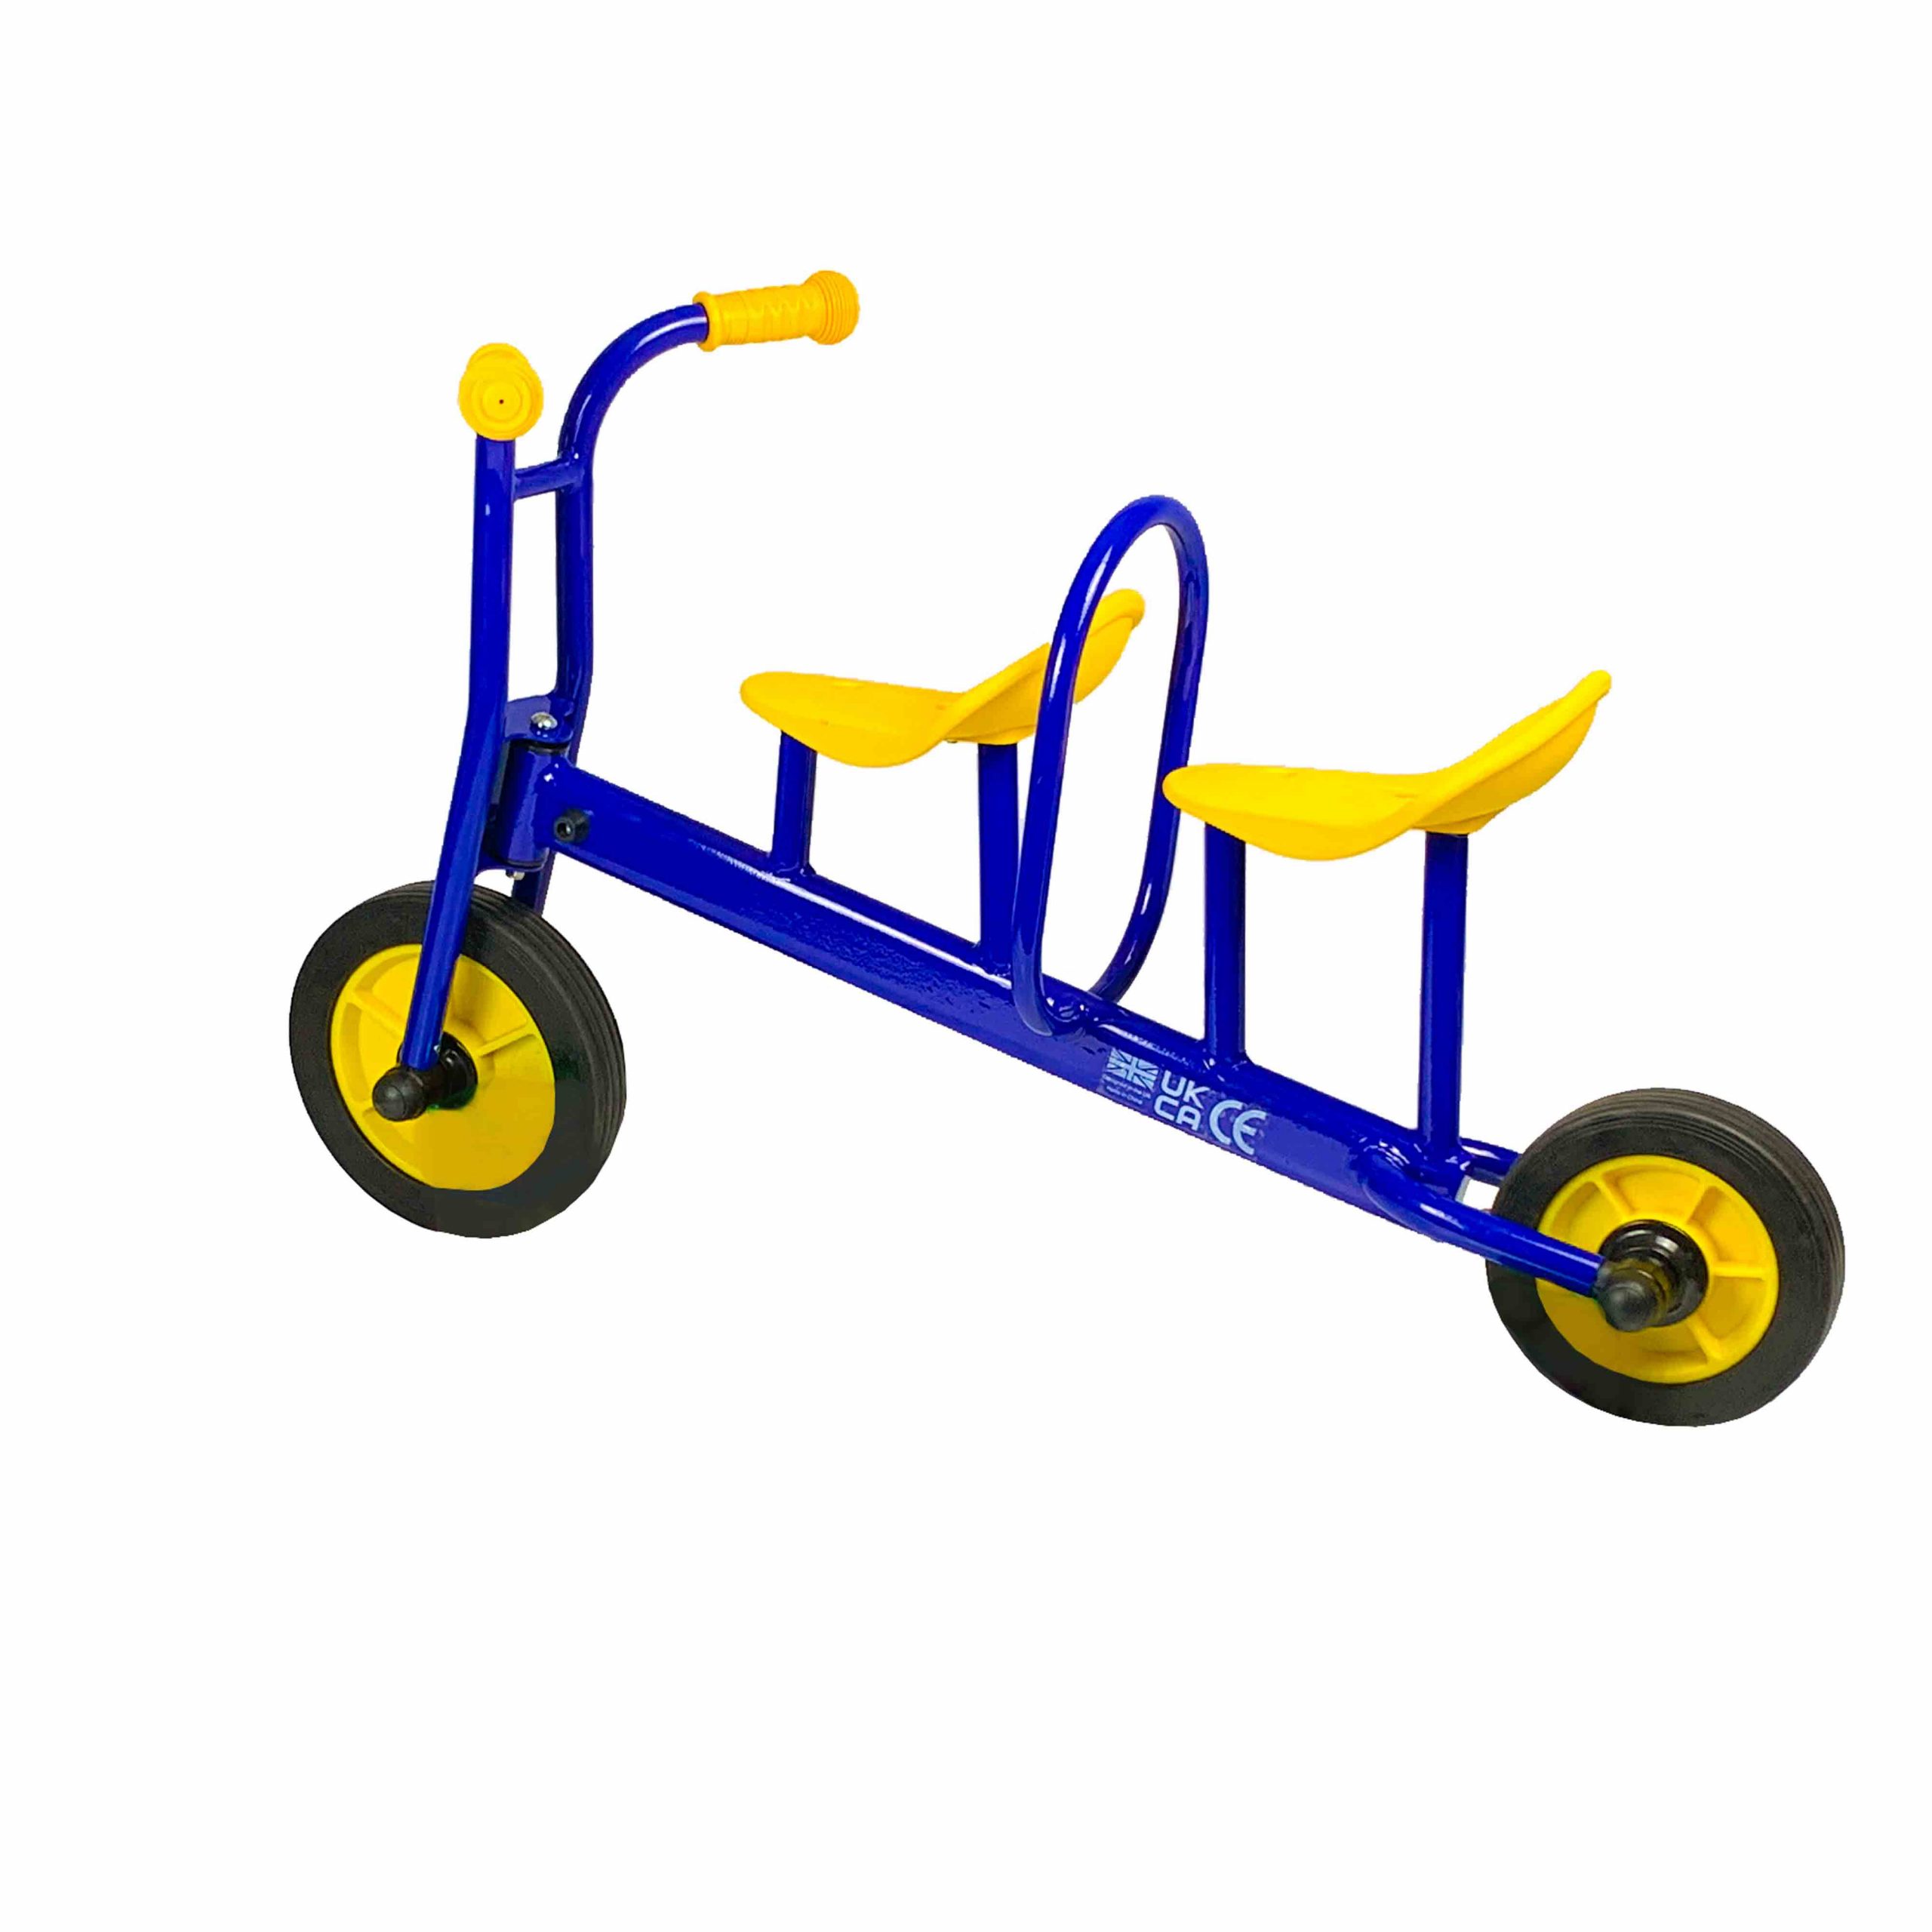 Italtrike Yellow Tricycle, 1 seat - FREE SHIPPING